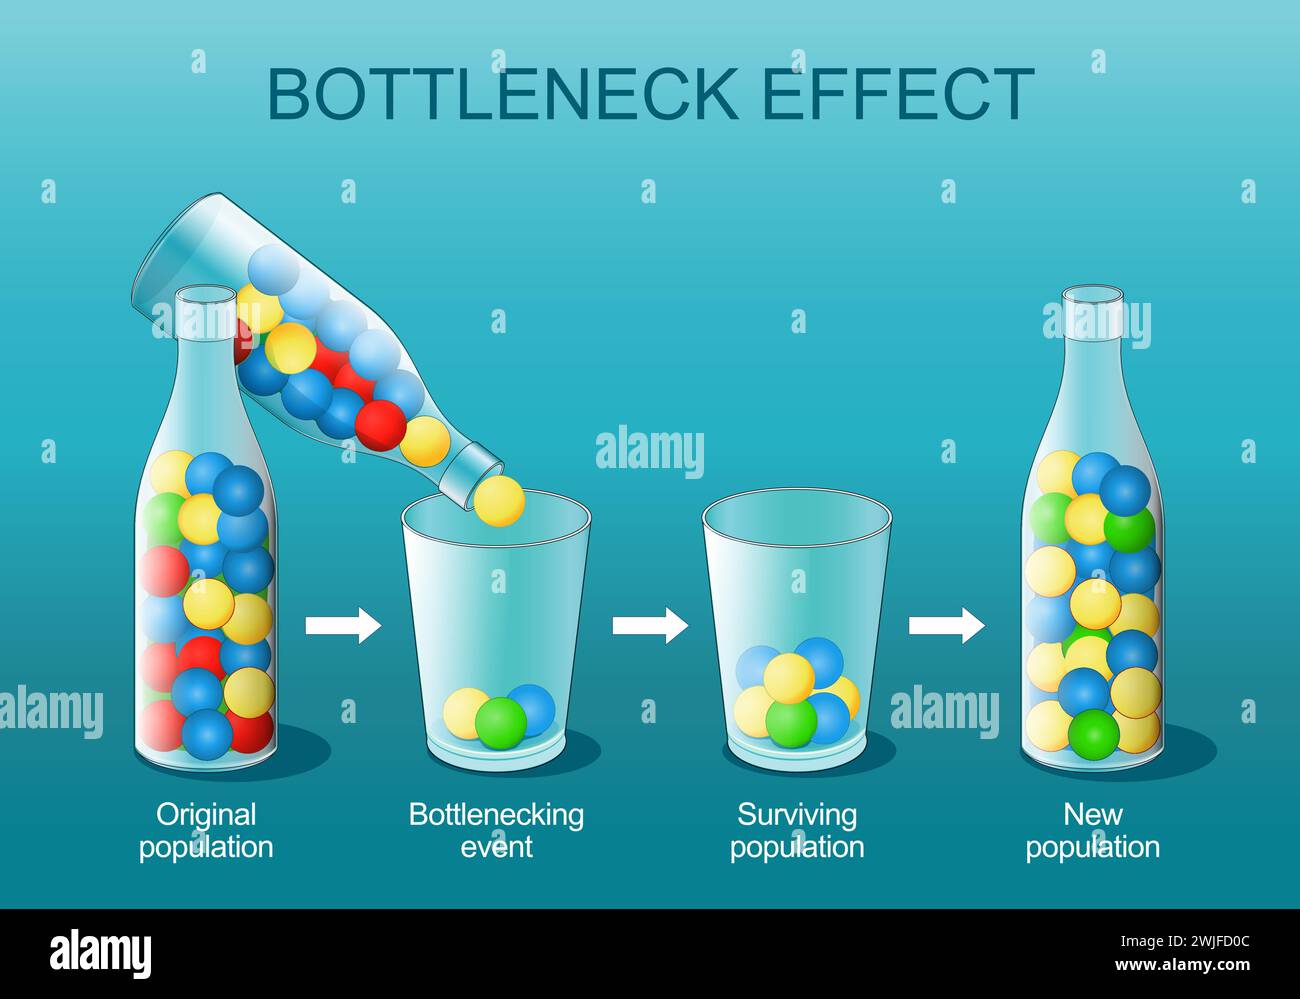 Bottleneck effect. Natural selection. Genetic bottleneck is a sharp reduction in the size of a population. explanation of the phenomenon using colorfu Stock Vector